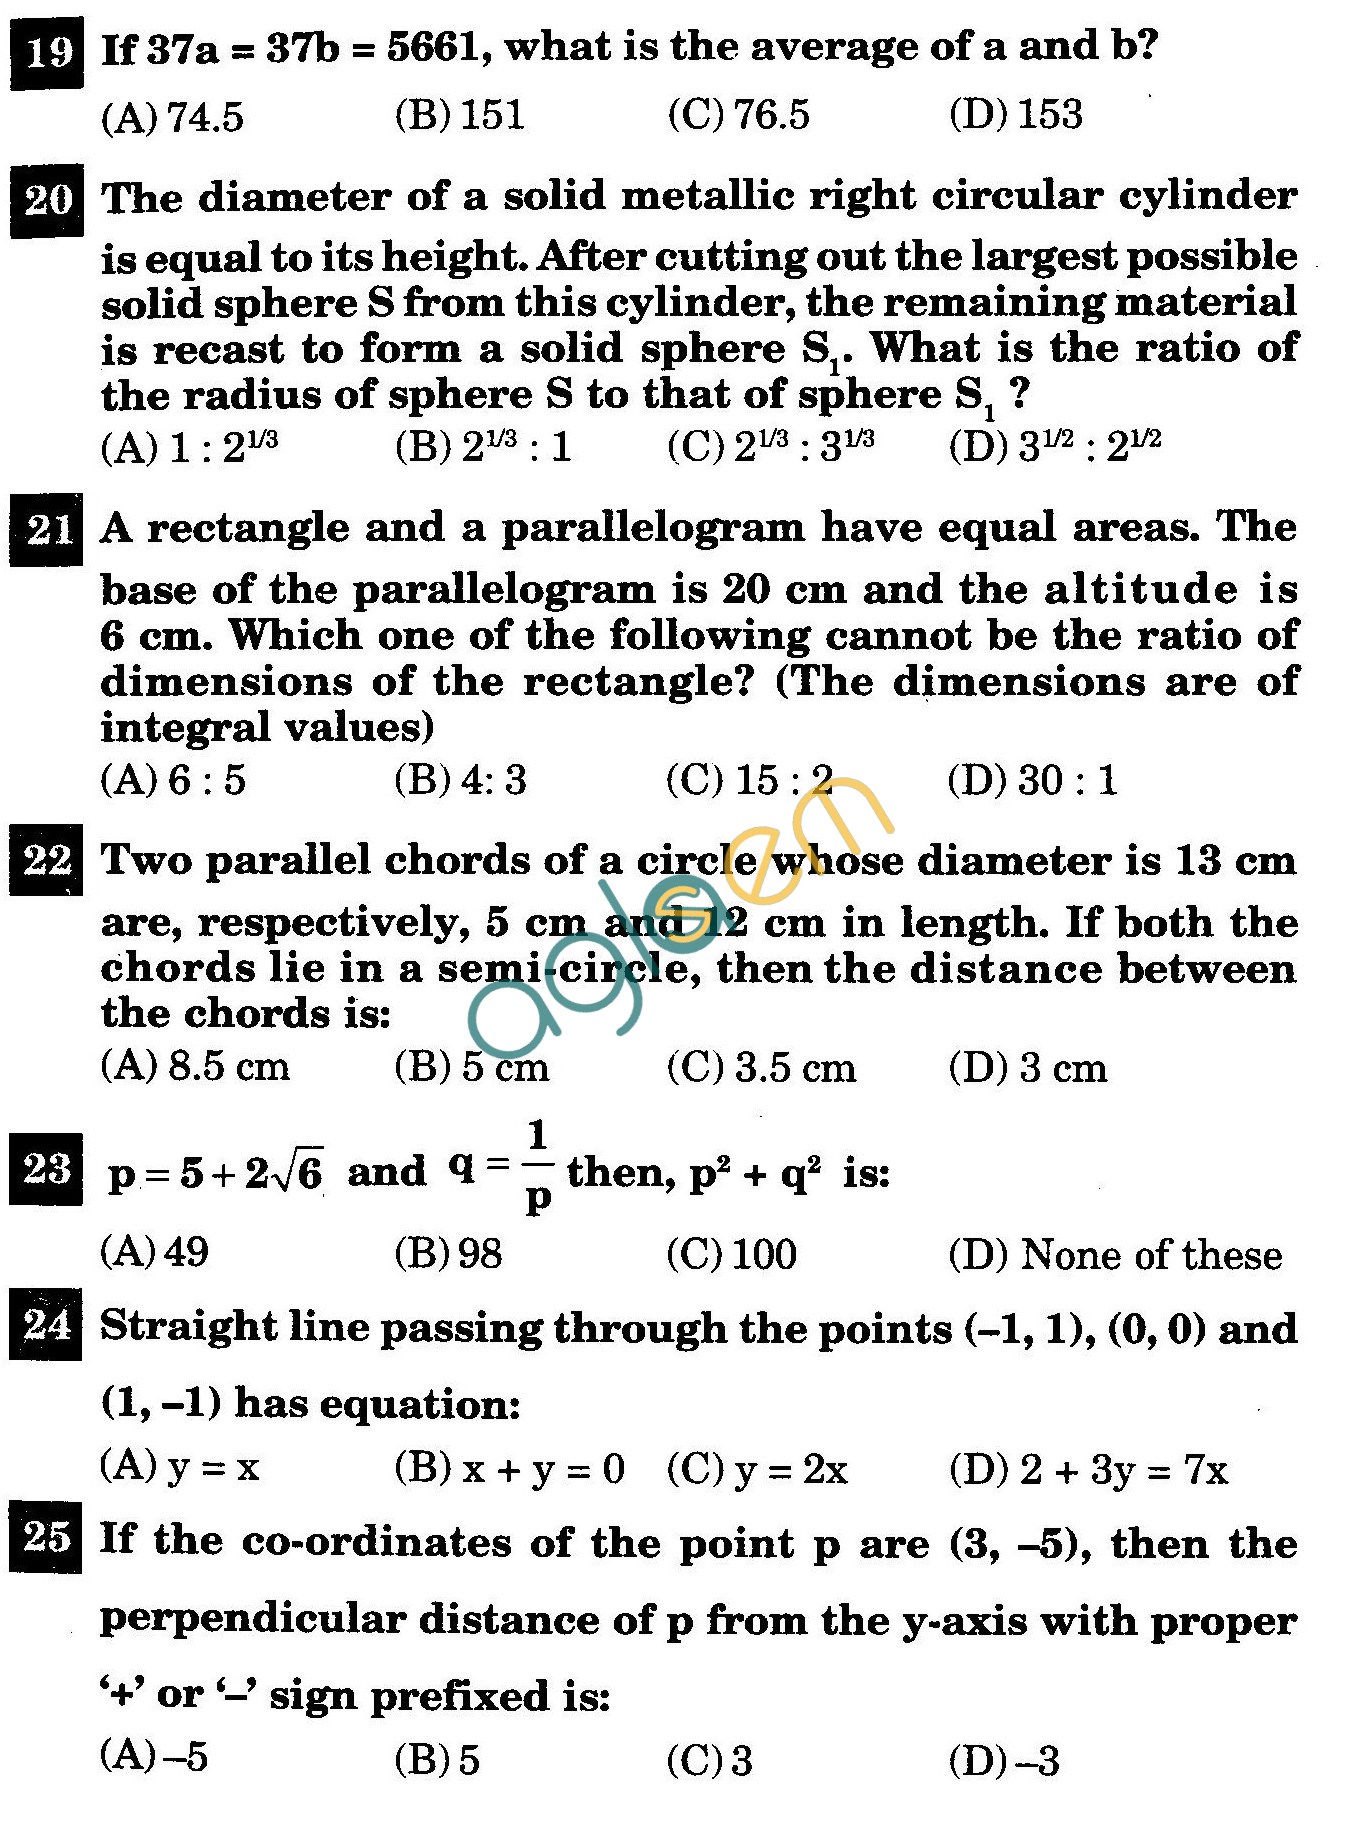 NSTSE 2011 Class IX Question Paper with Answers - Mathematics